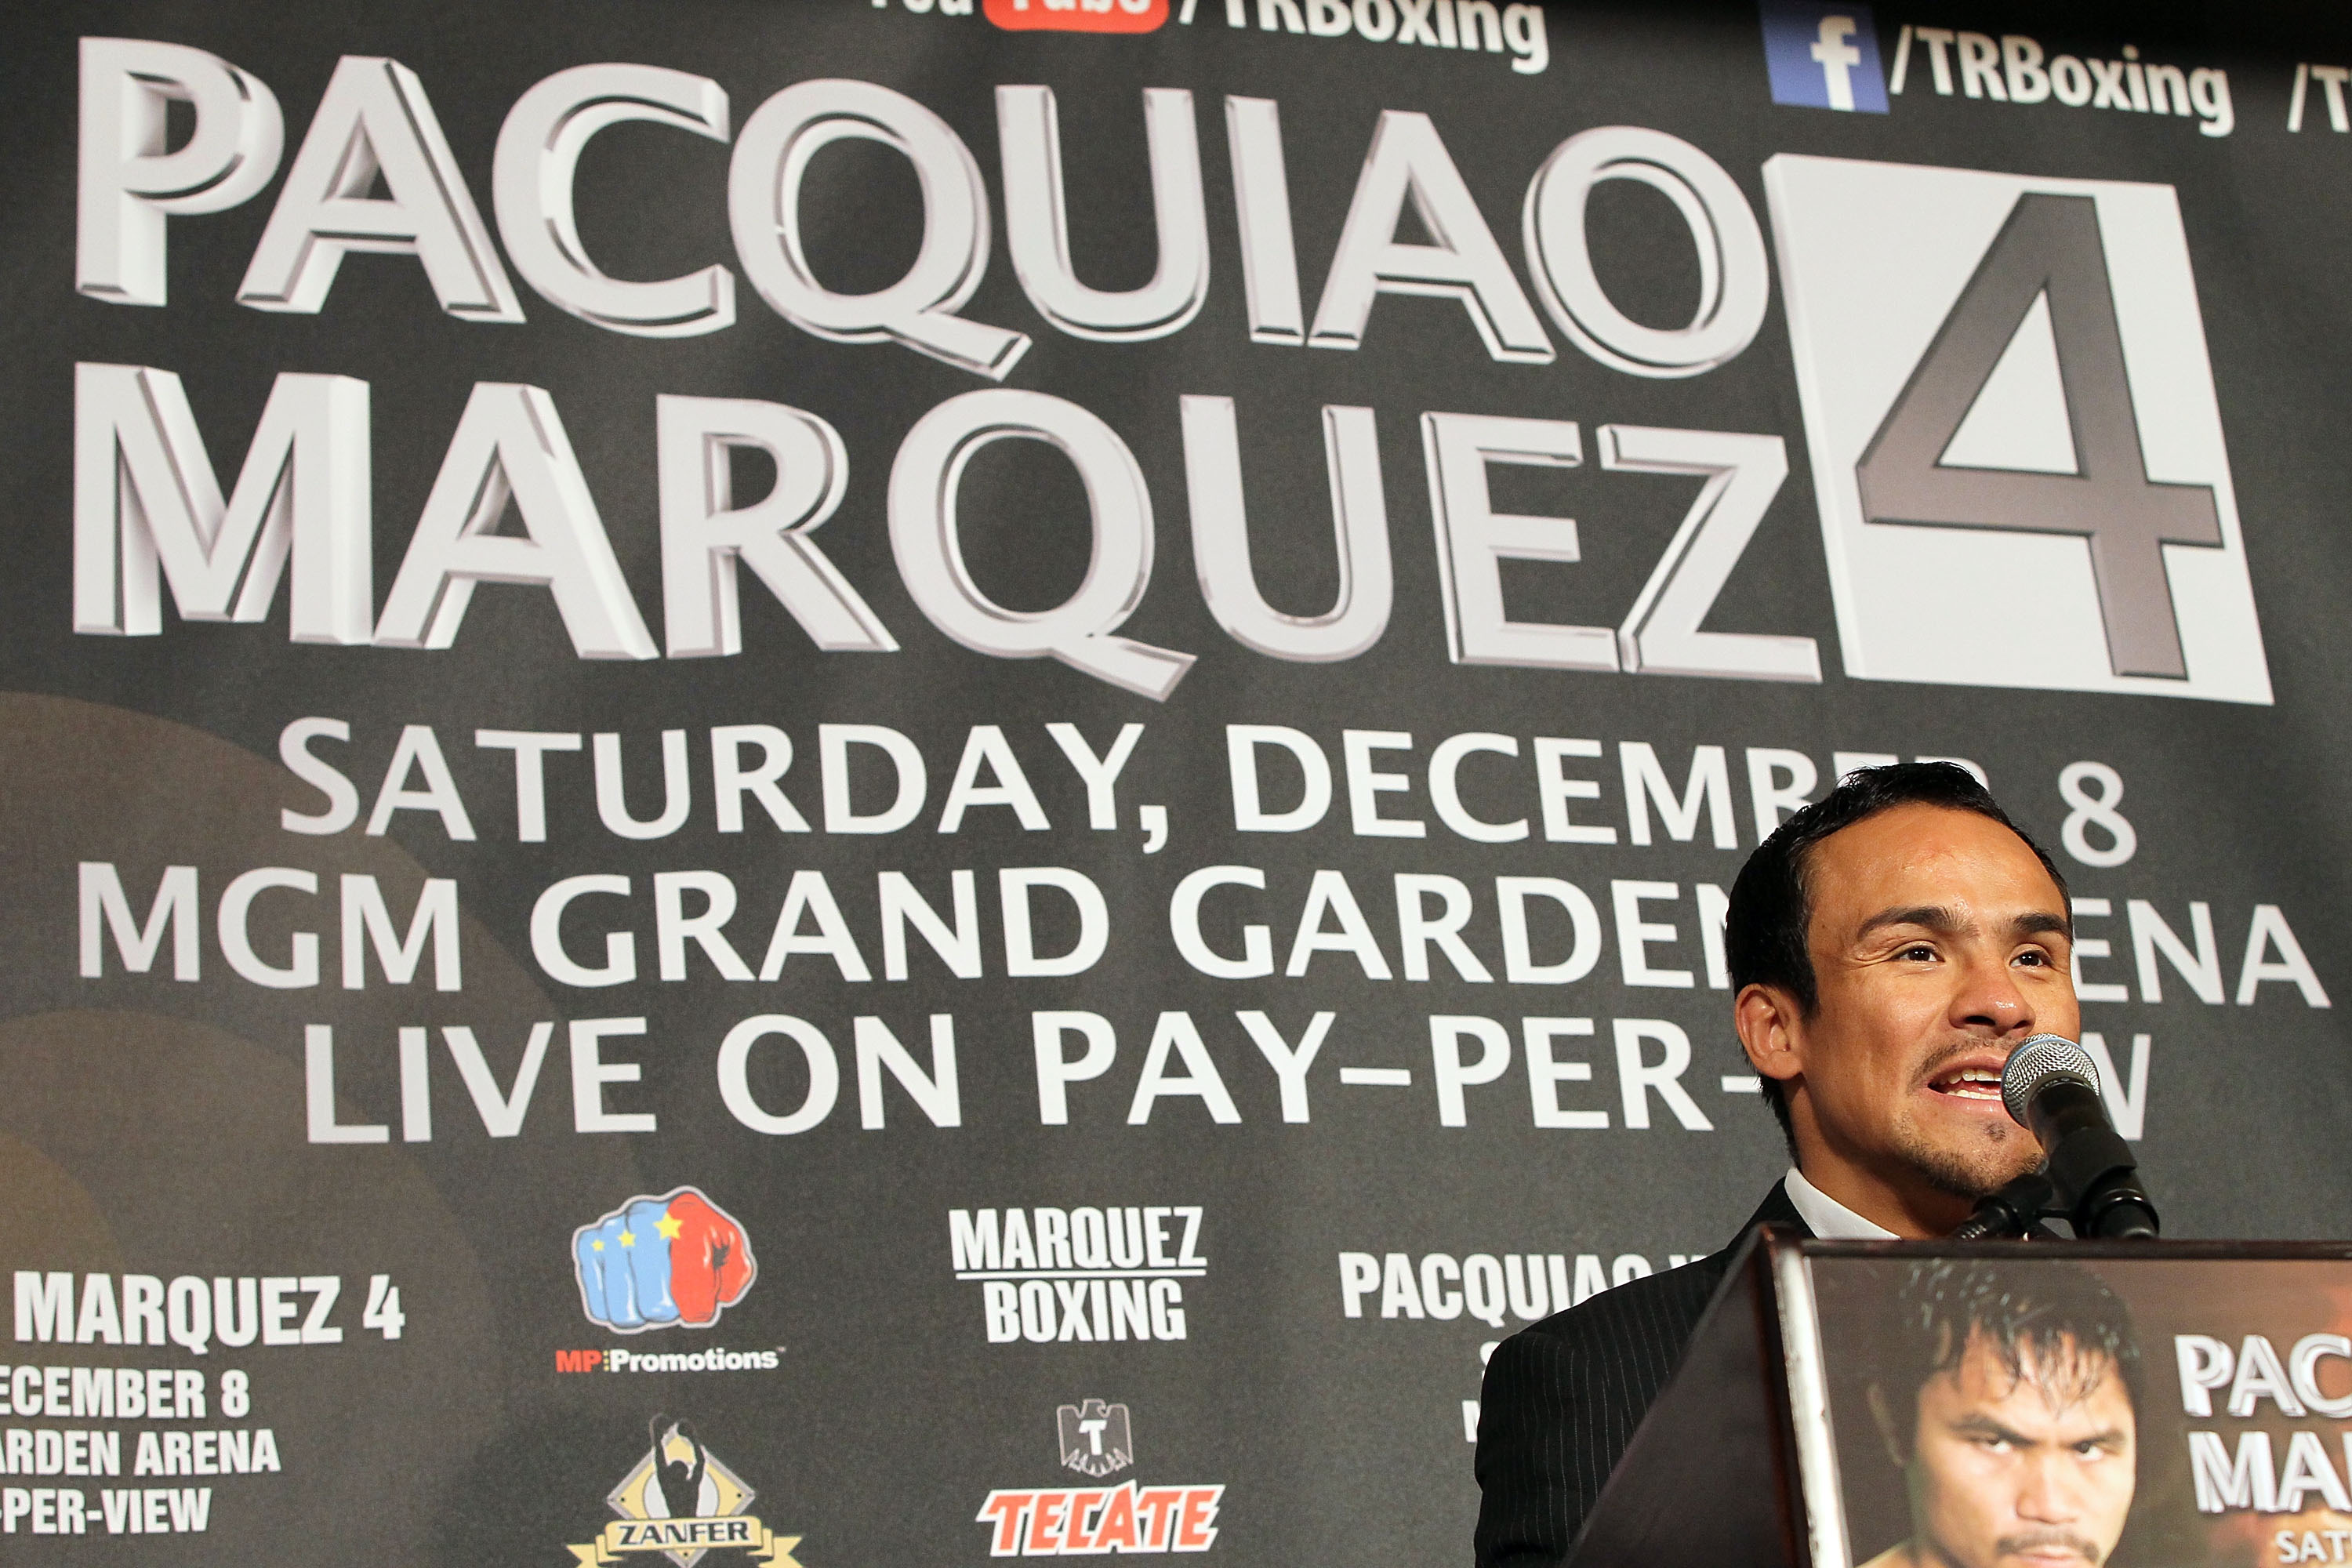 Pacquiao vs marquez 4 betting odds hope for better place mp3 rocket